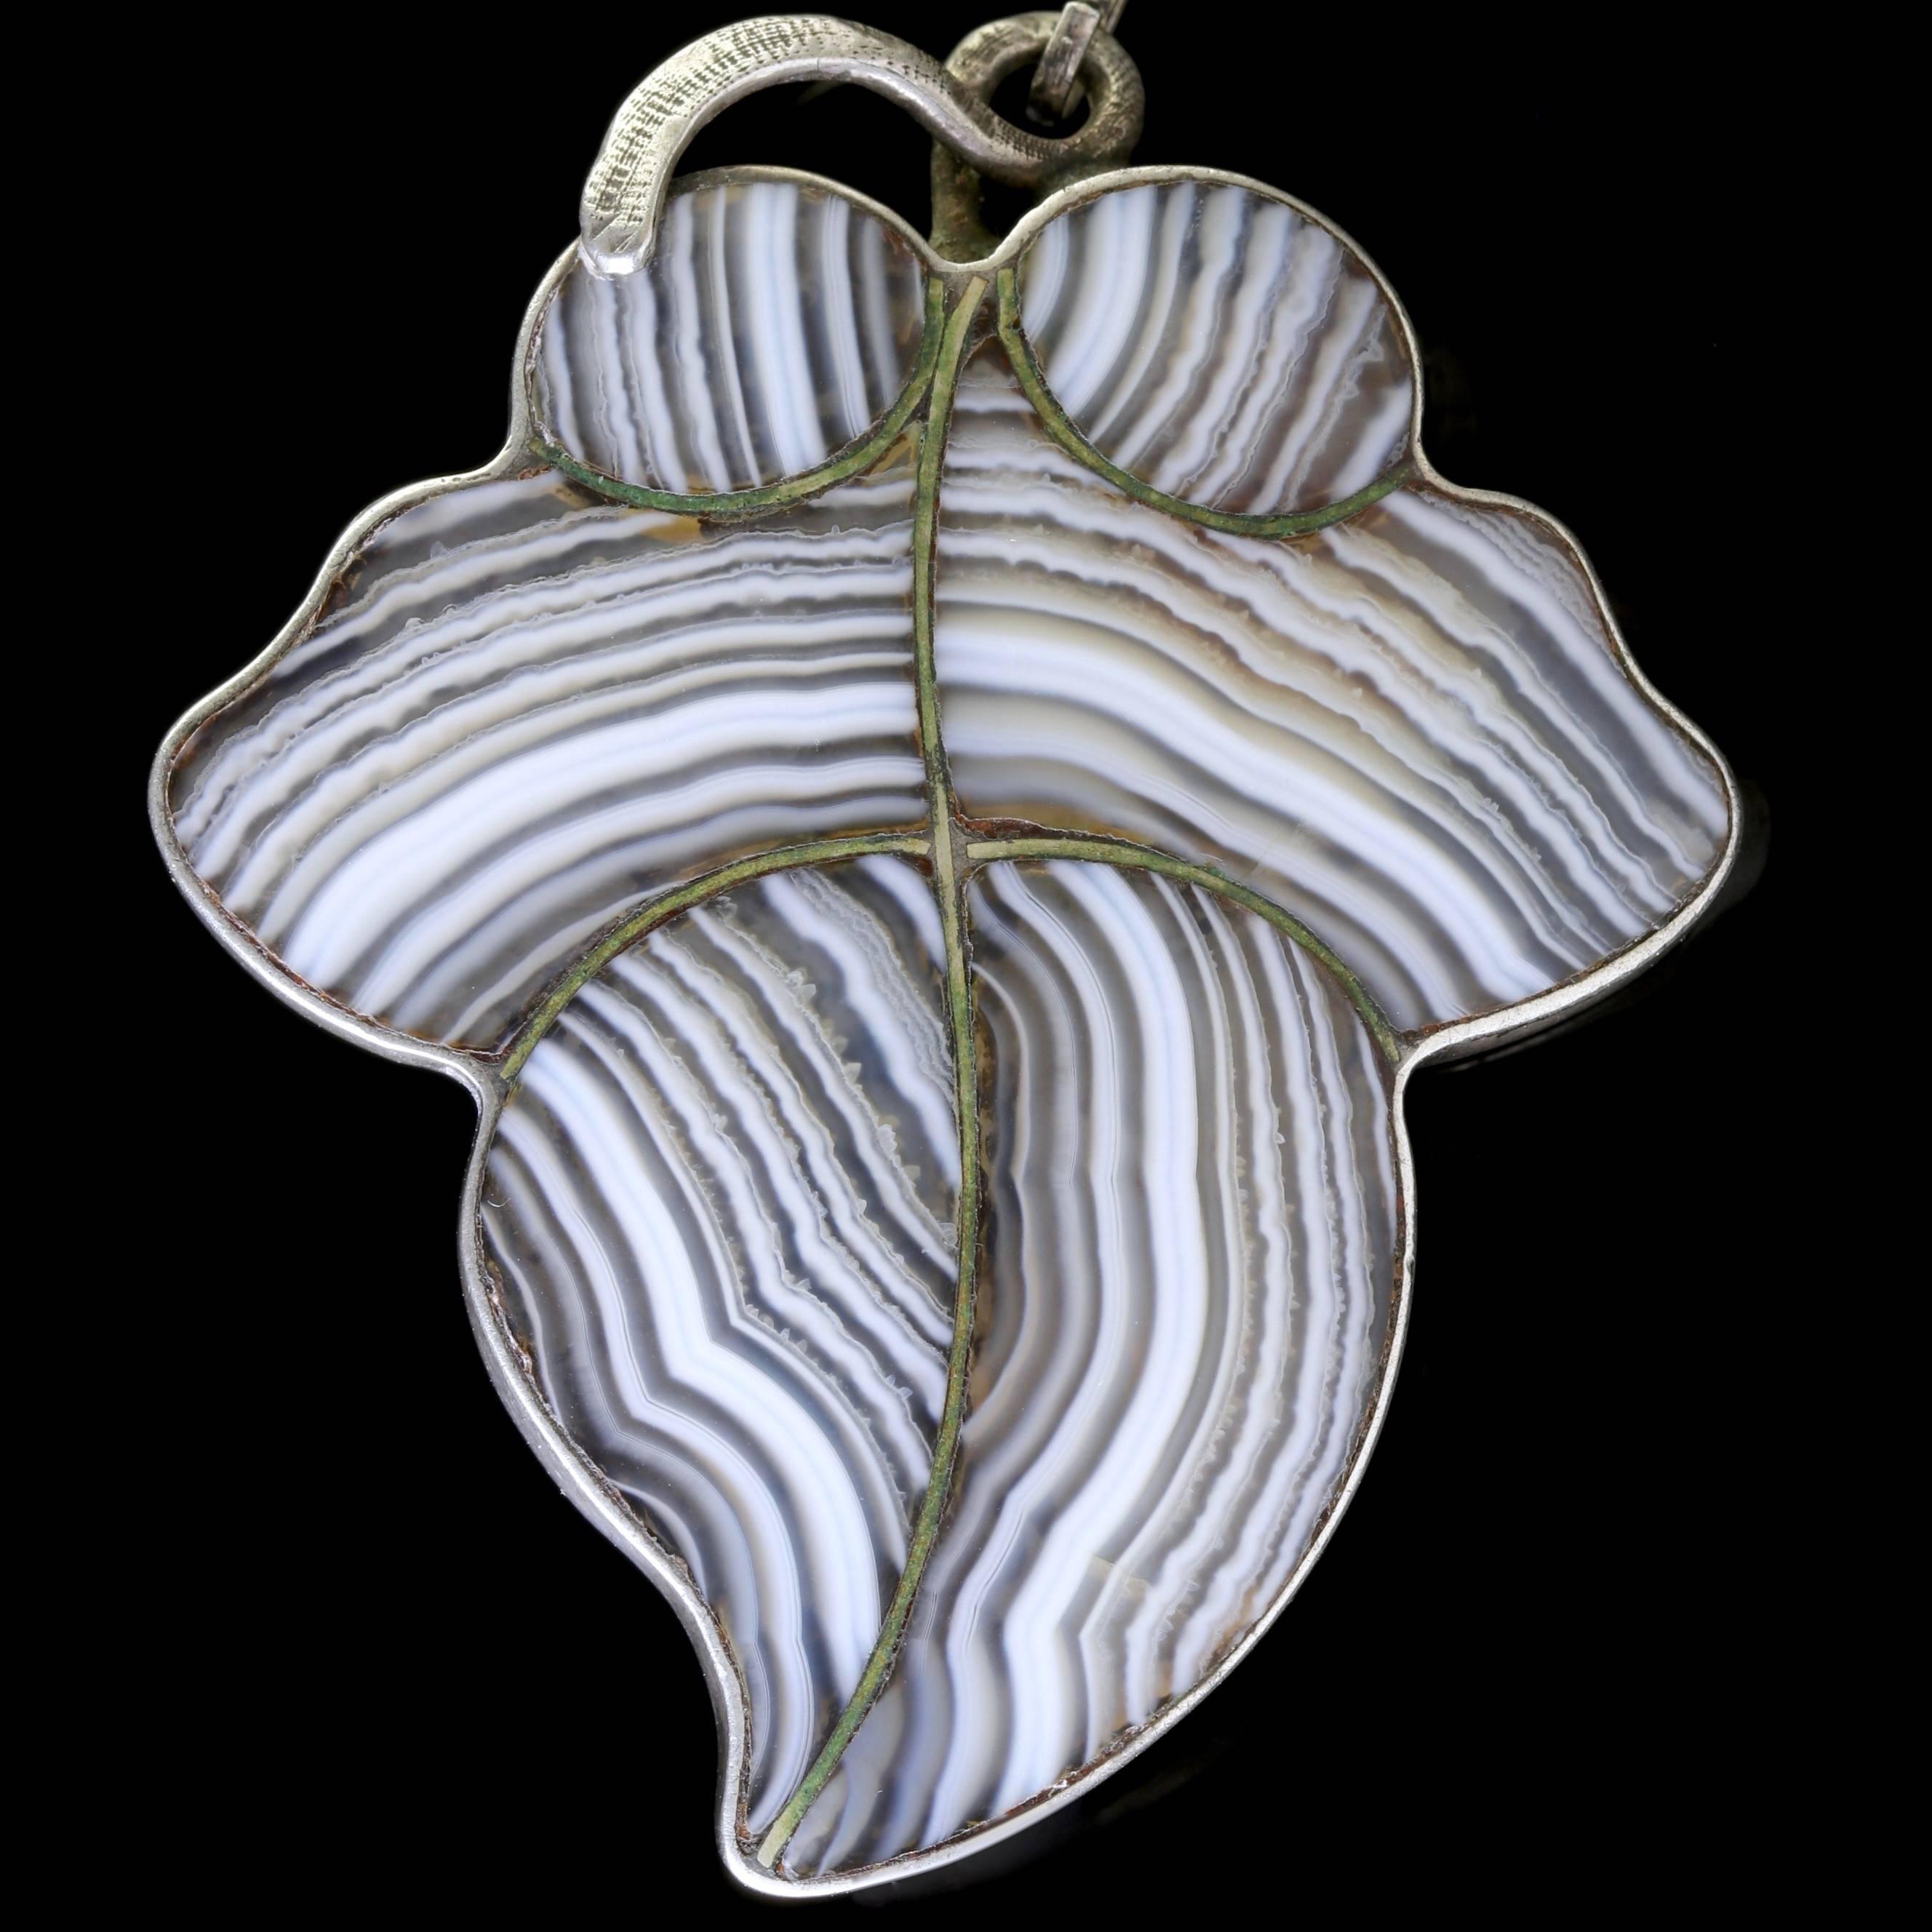 To read more please click continue reading below-

This beautiful antique Sterling Silver Scottish Agate brooch is genuine Victorian Circa 1860.

Scottish jewellery was made popular by Queen Victoria as it became a souvenir of her trips to Scotland.